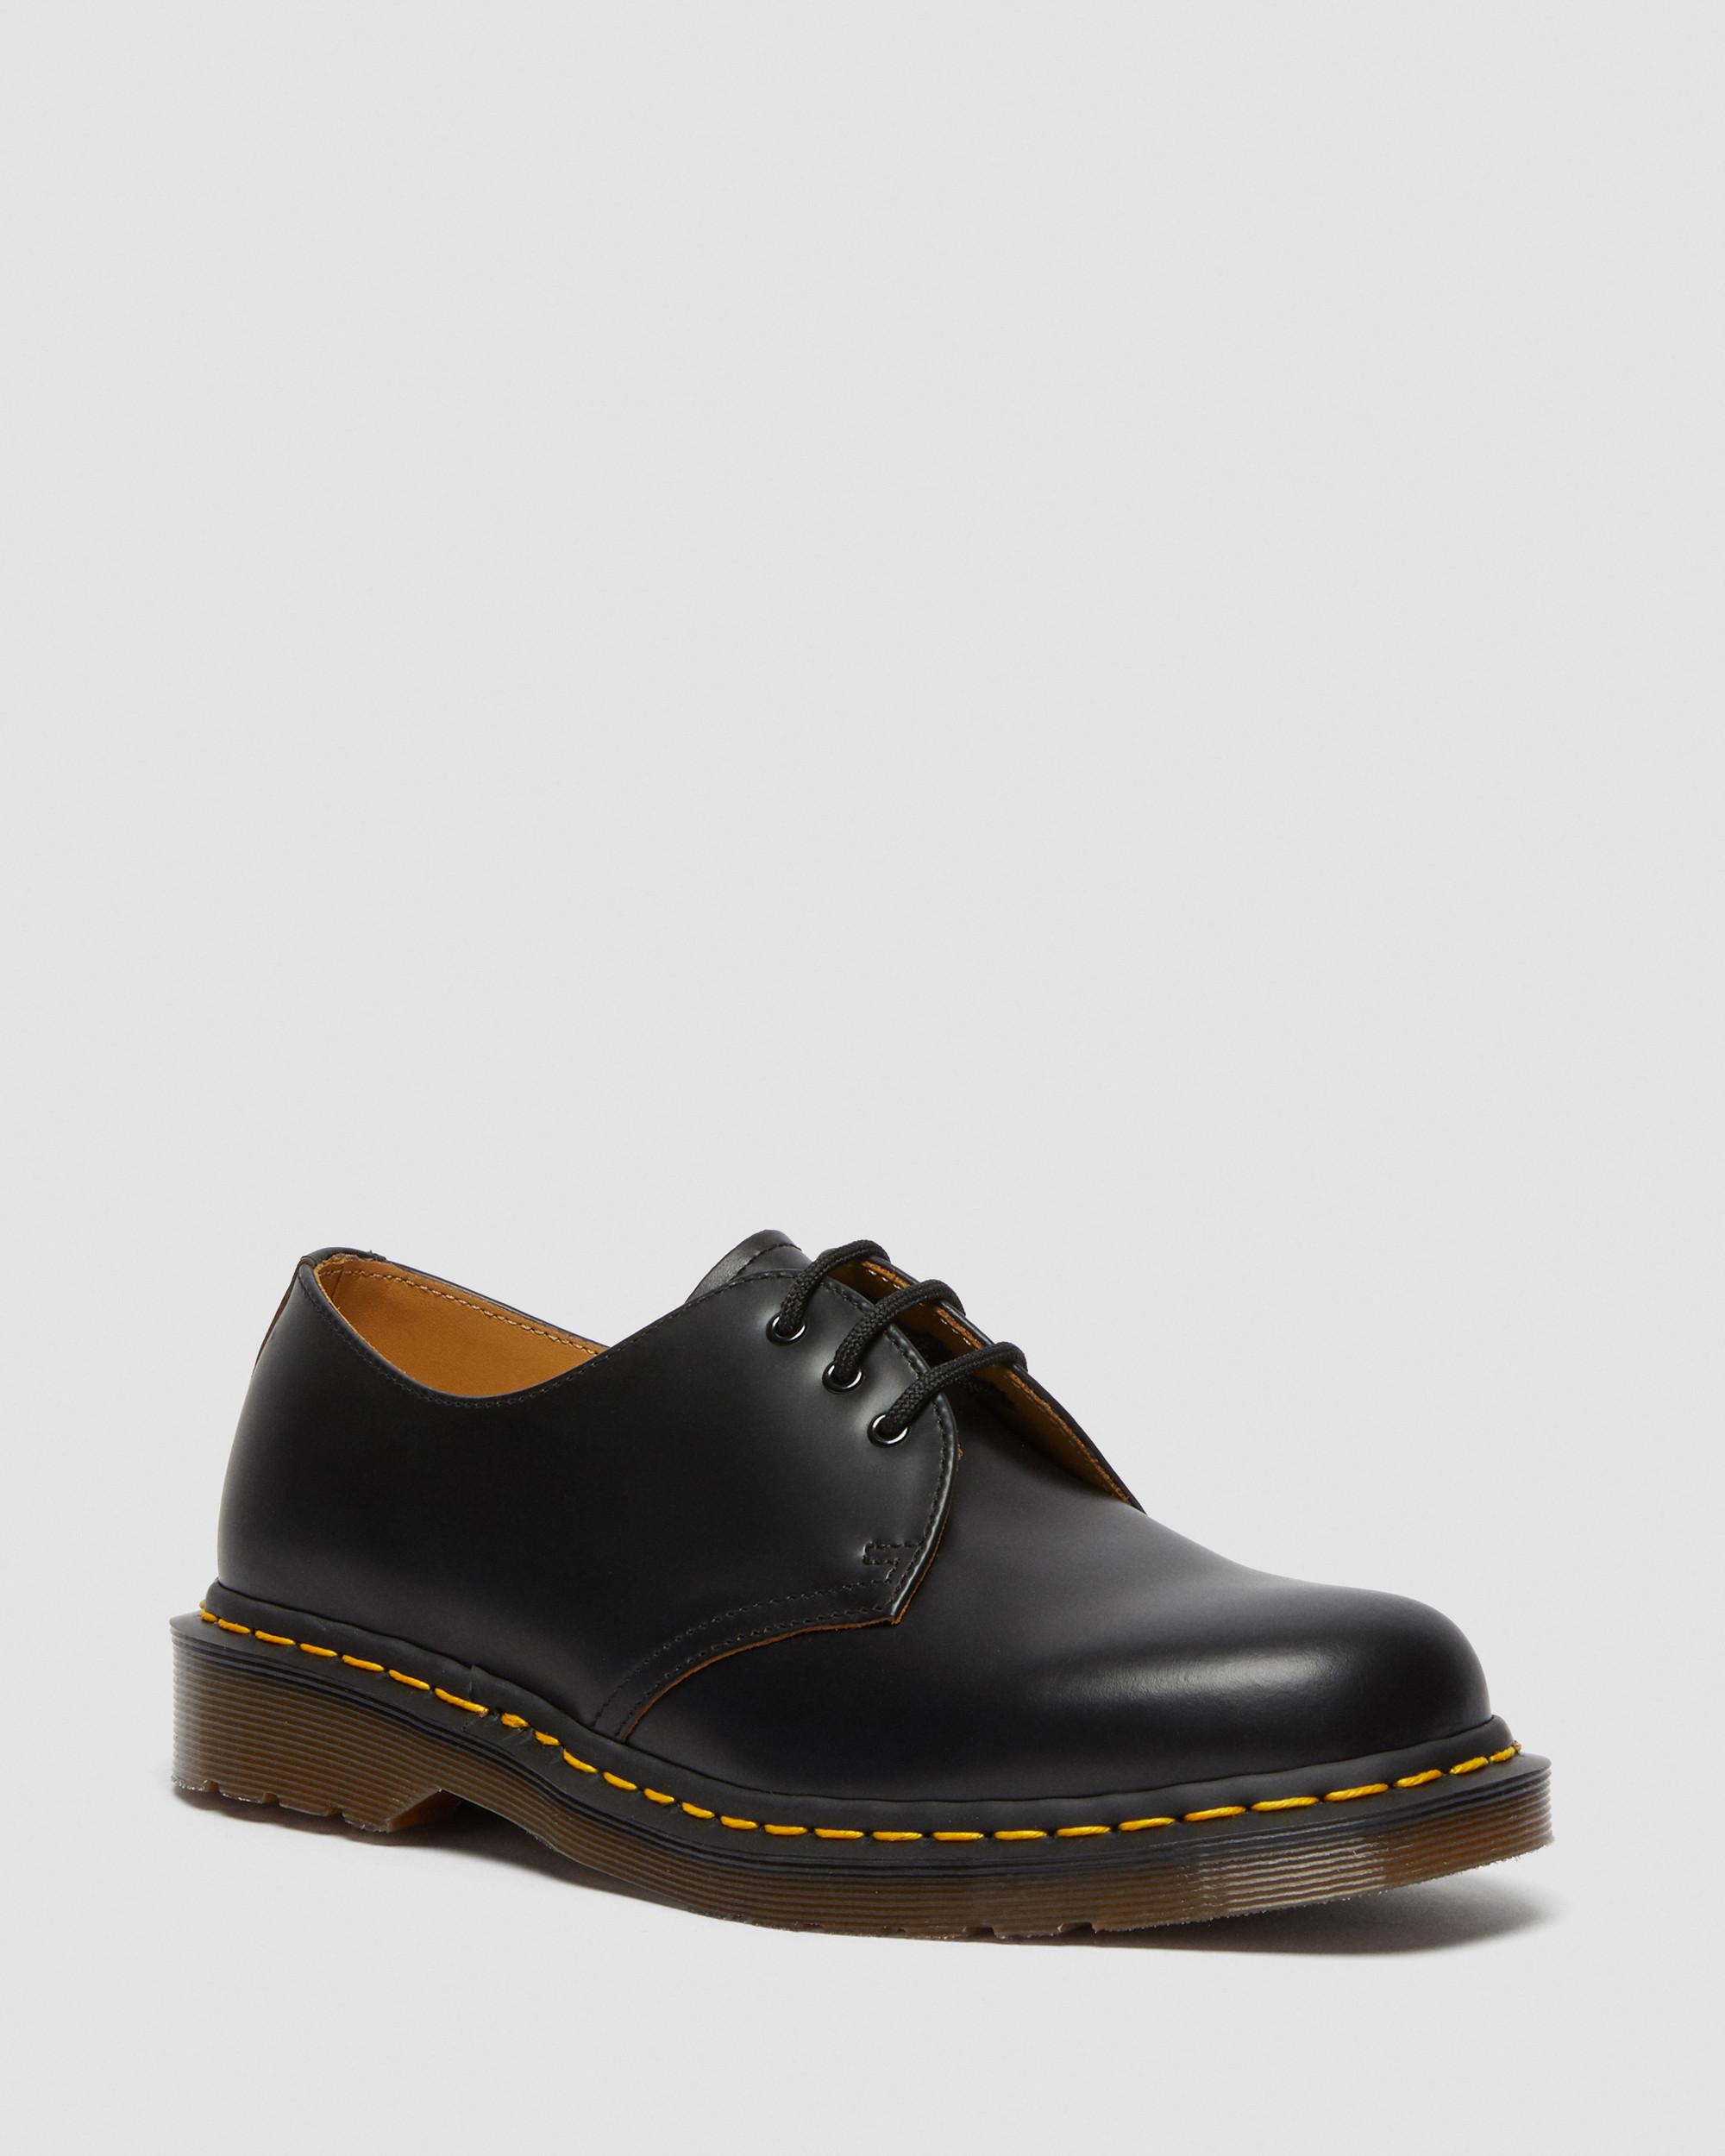 1461 Vintage Made in England Oxford Shoes | Dr. Martens